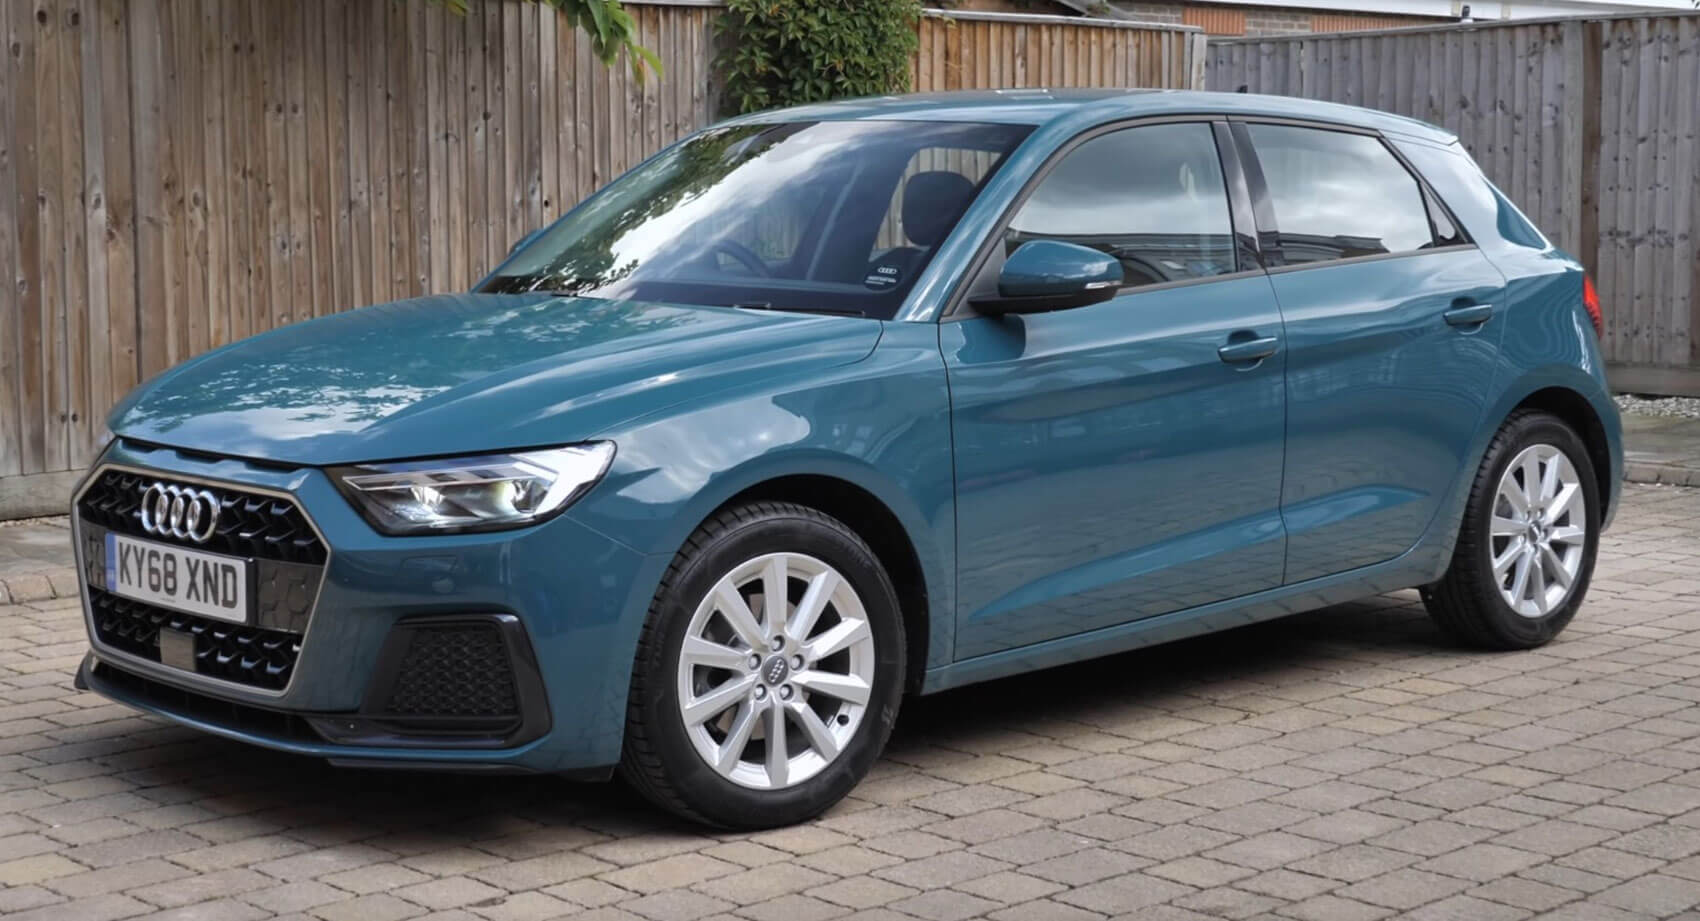 2019 Audi A1 Long-Term Review: What's It Like After Six Months?